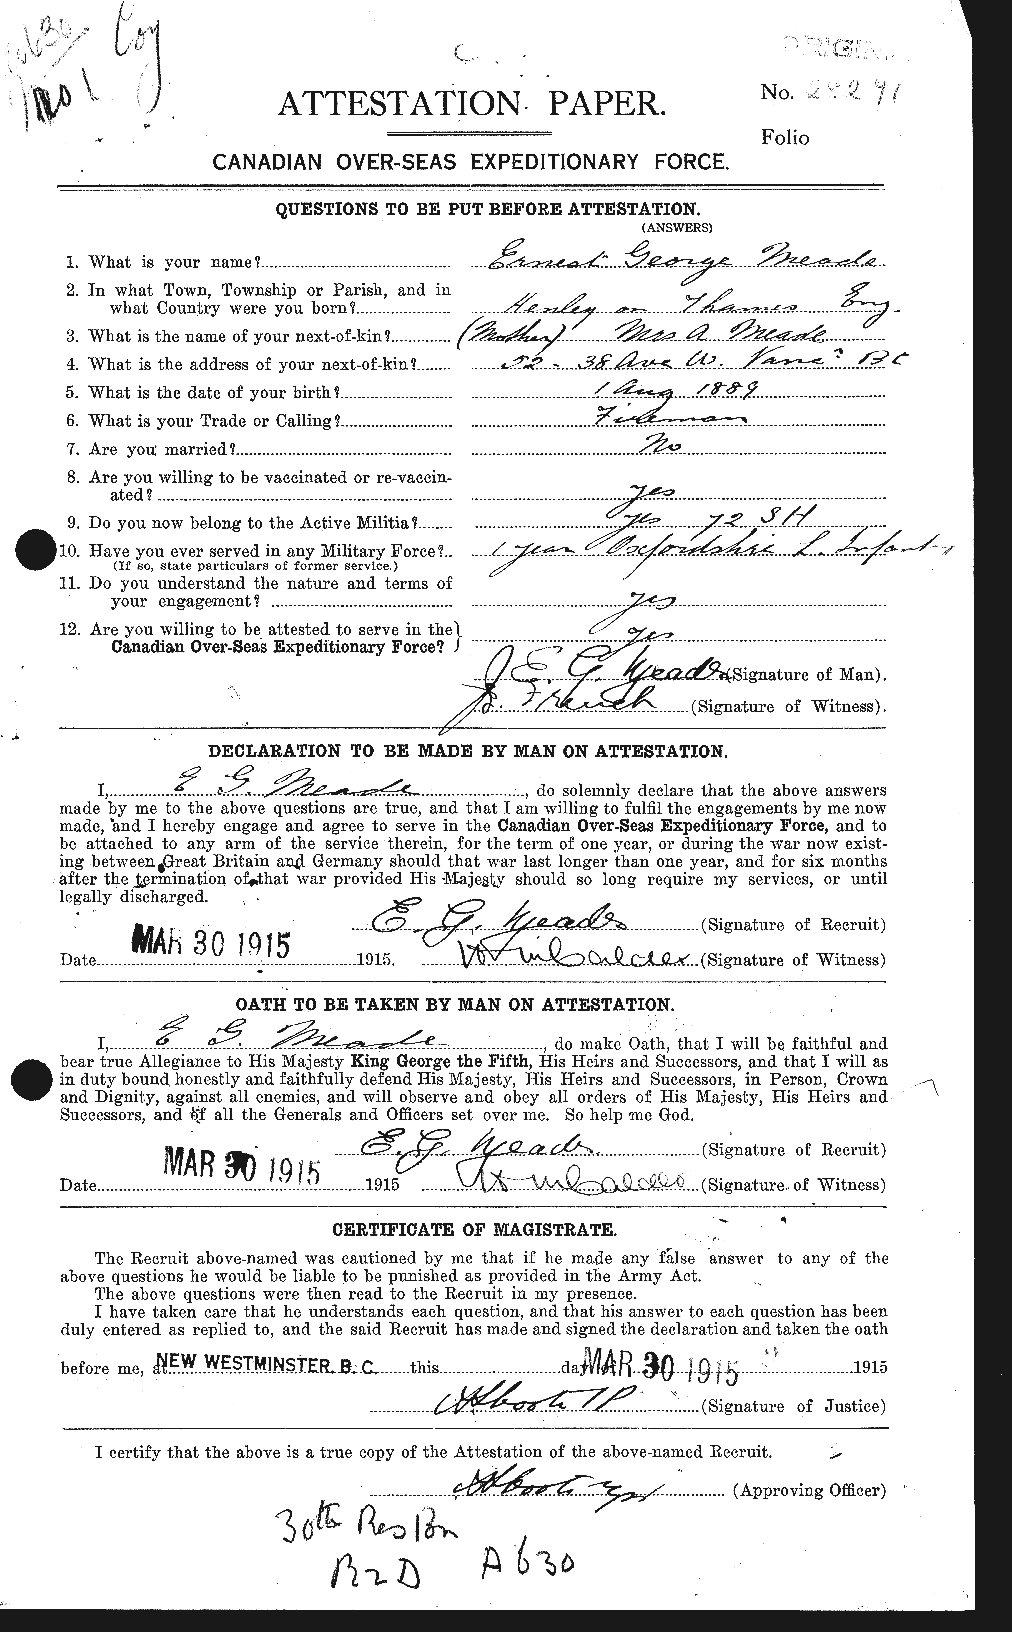 Personnel Records of the First World War - CEF 488373a